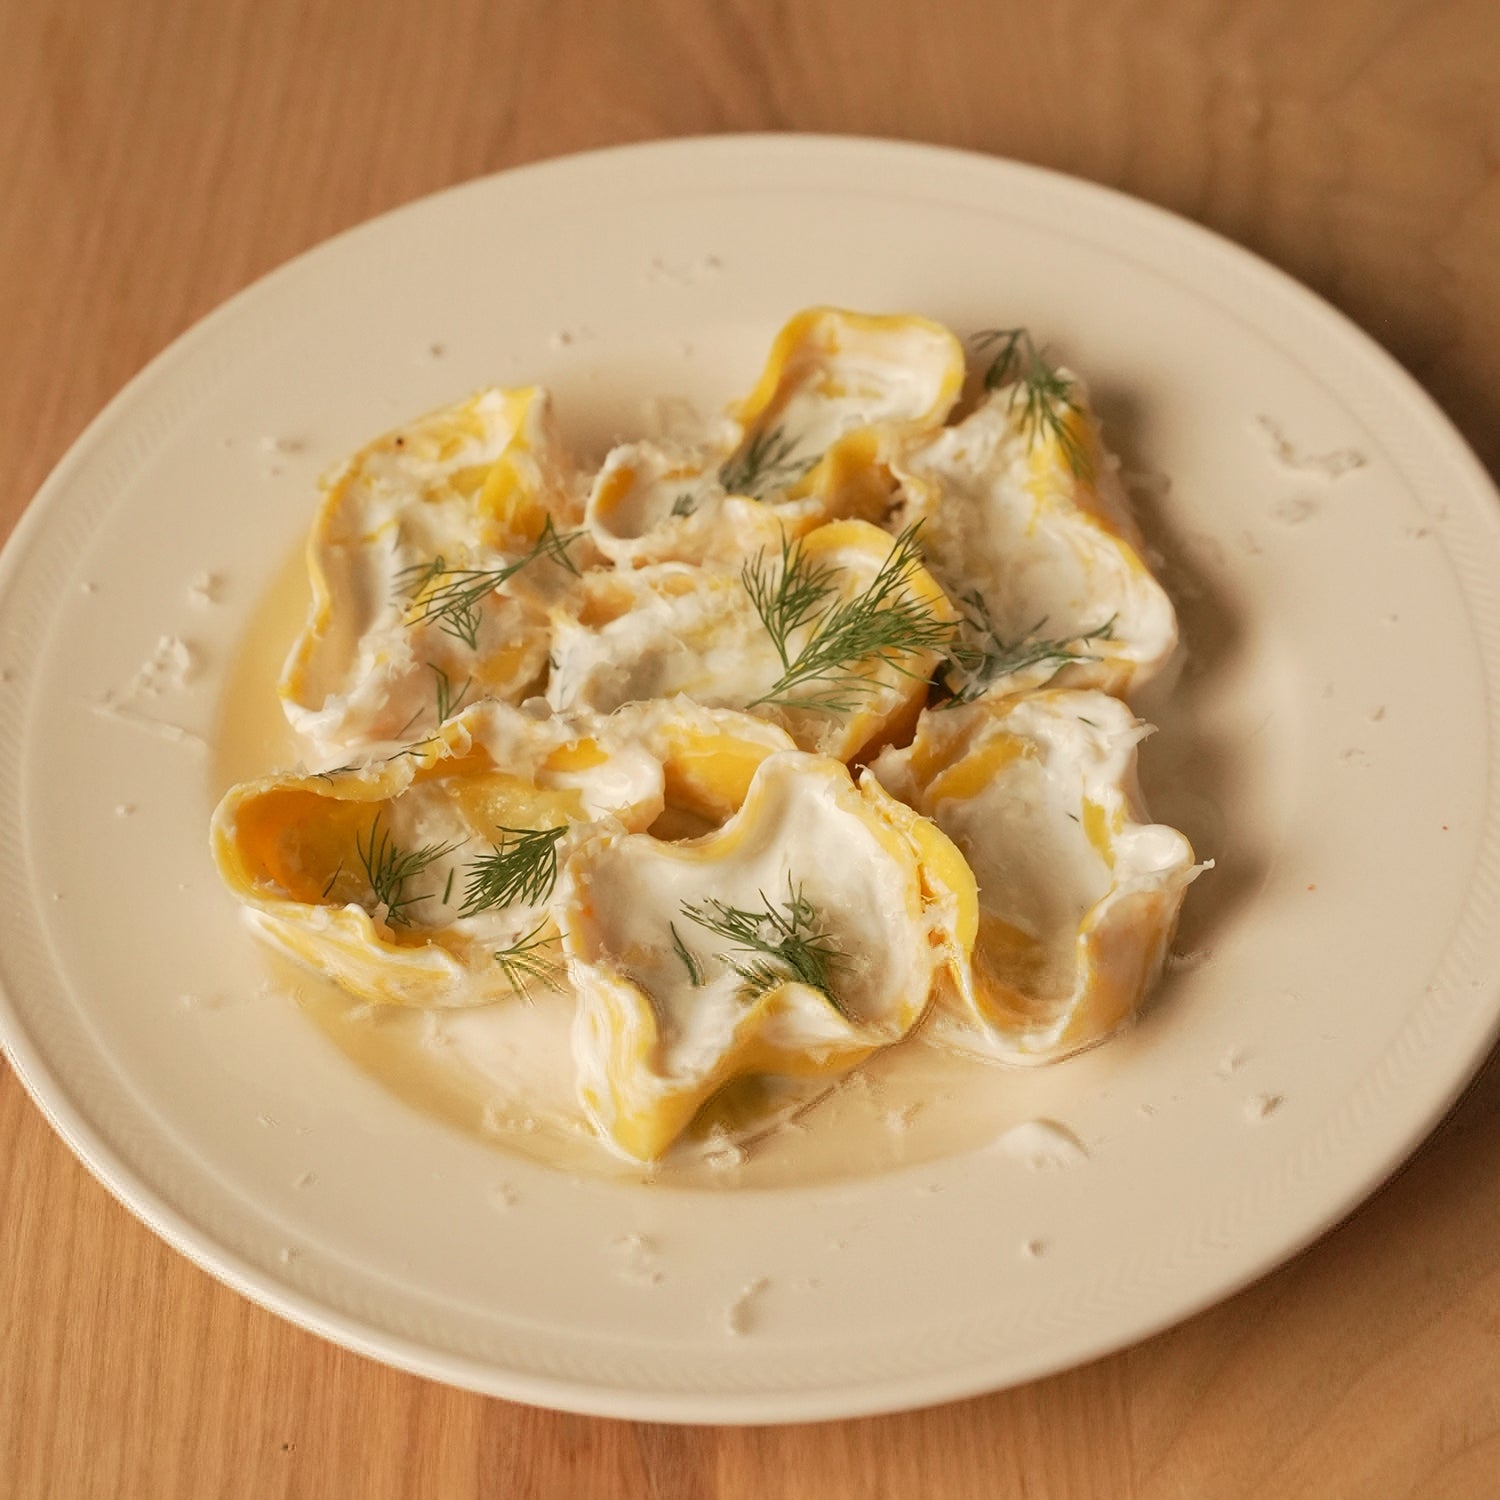 Mateo Zielonka’s cappelletti filled with potato &amp; mint, served in a mascarpone dill sauce